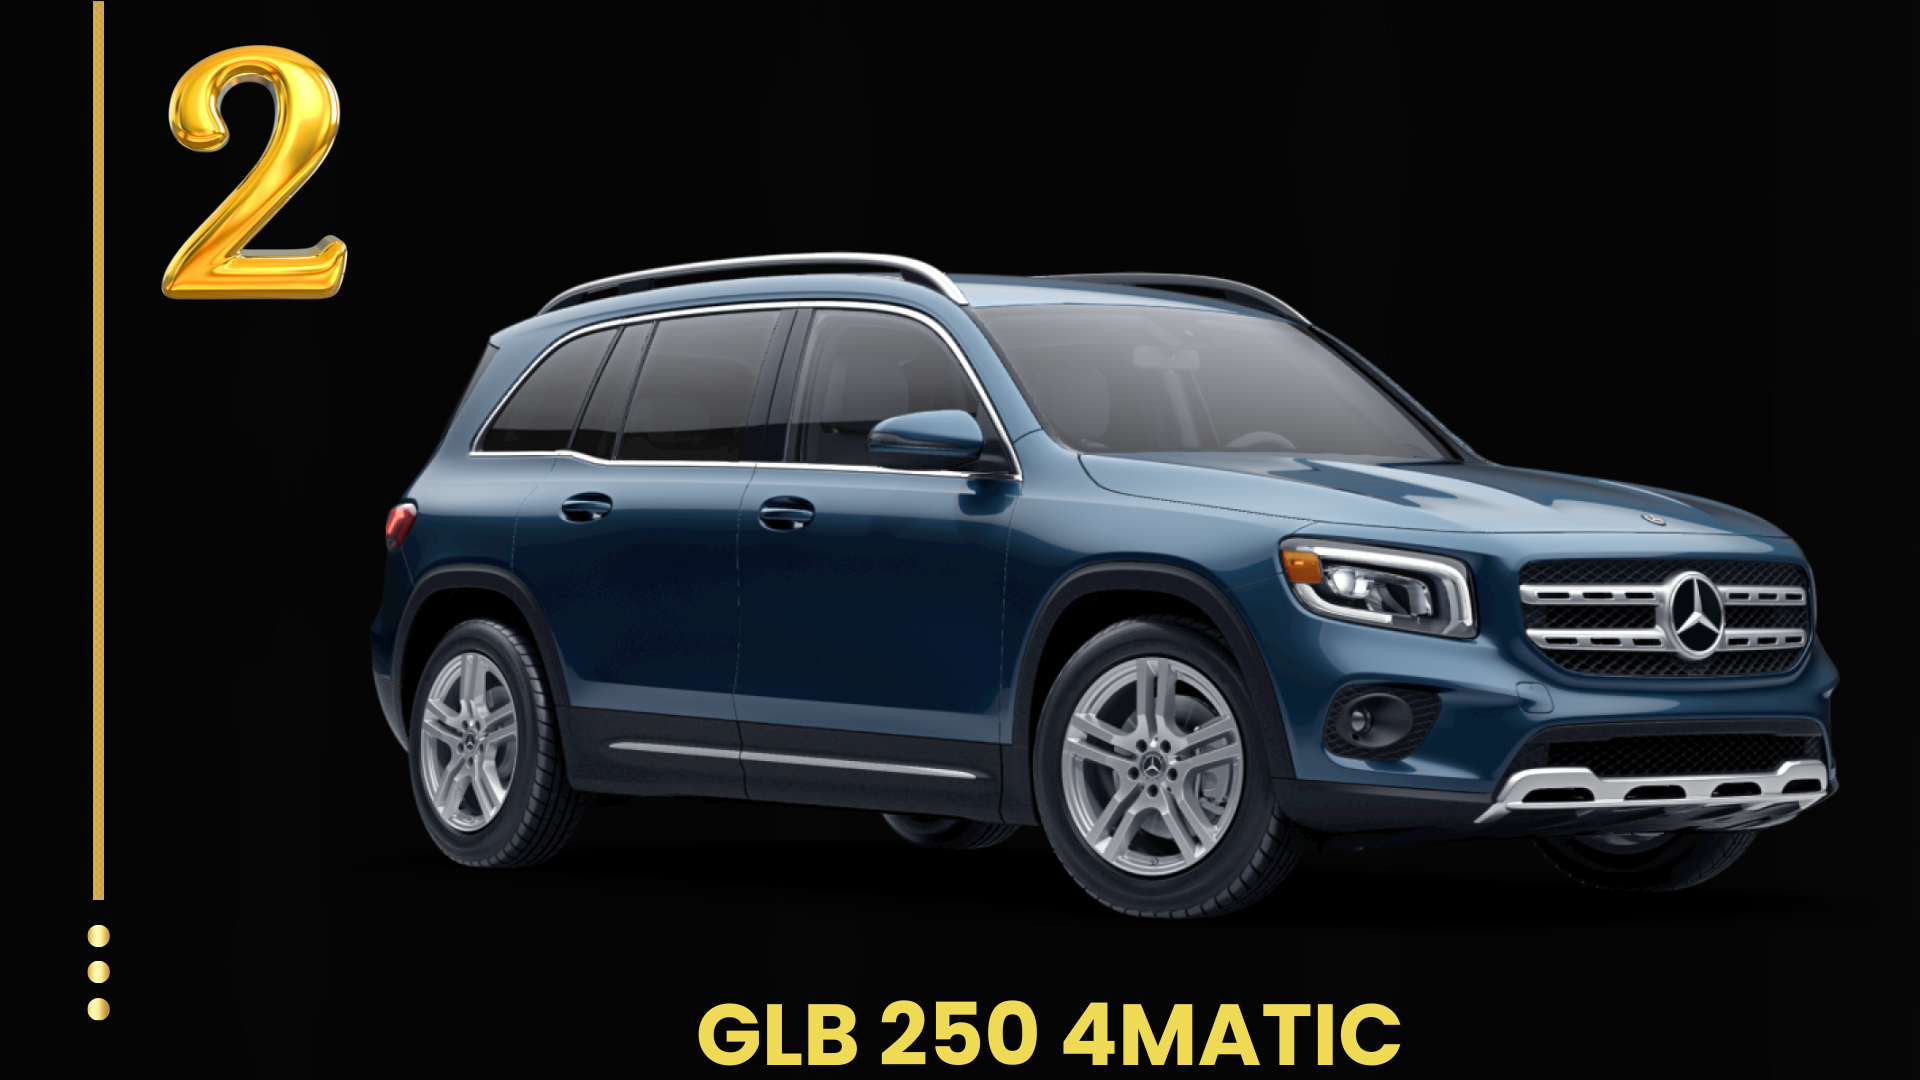 #2 GLB 250 4matic SUV qualifies for section 179 tax credit